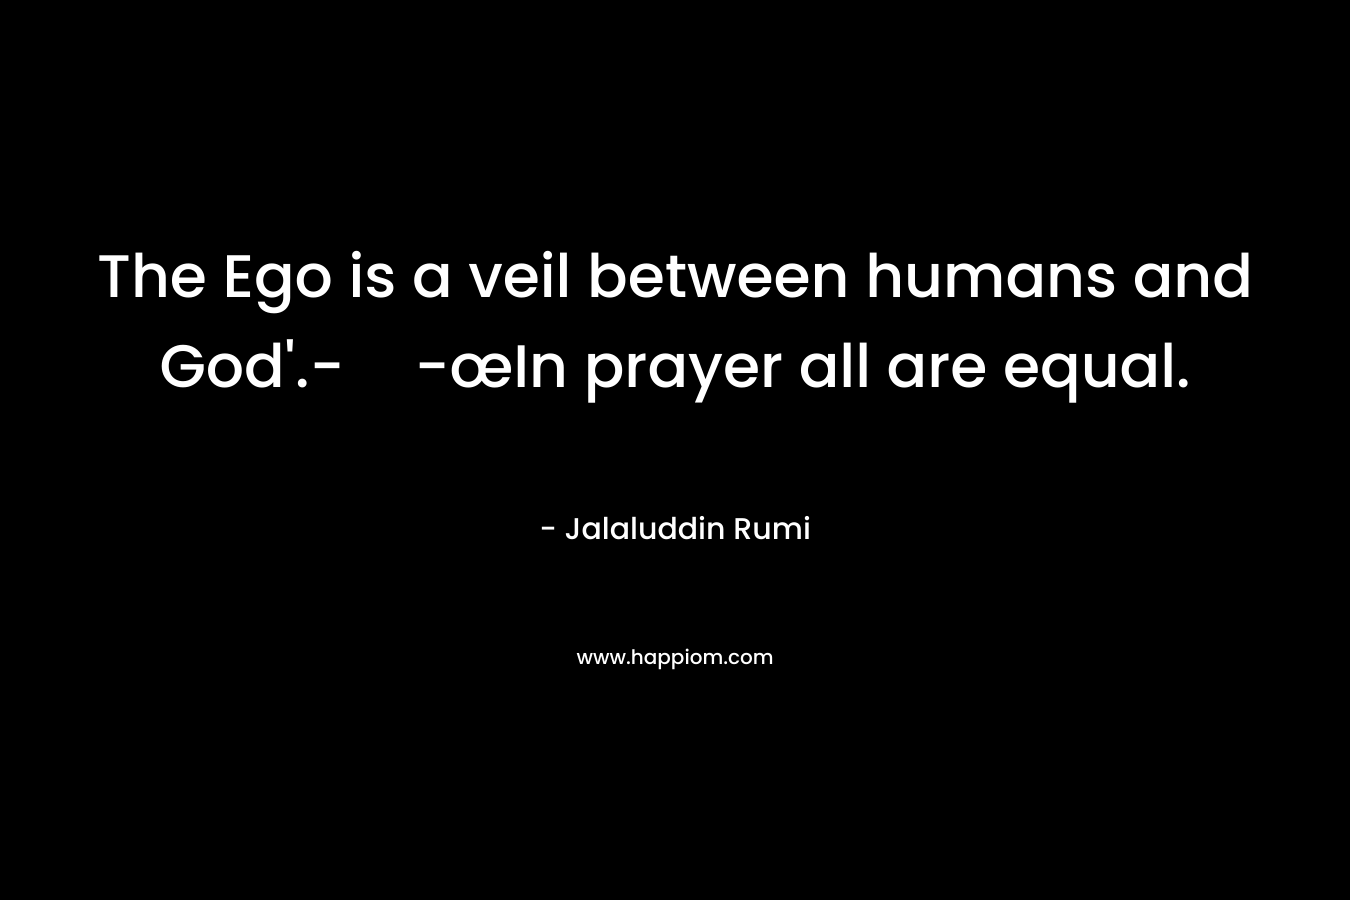 The Ego is a veil between humans and God'.--œIn prayer all are equal.